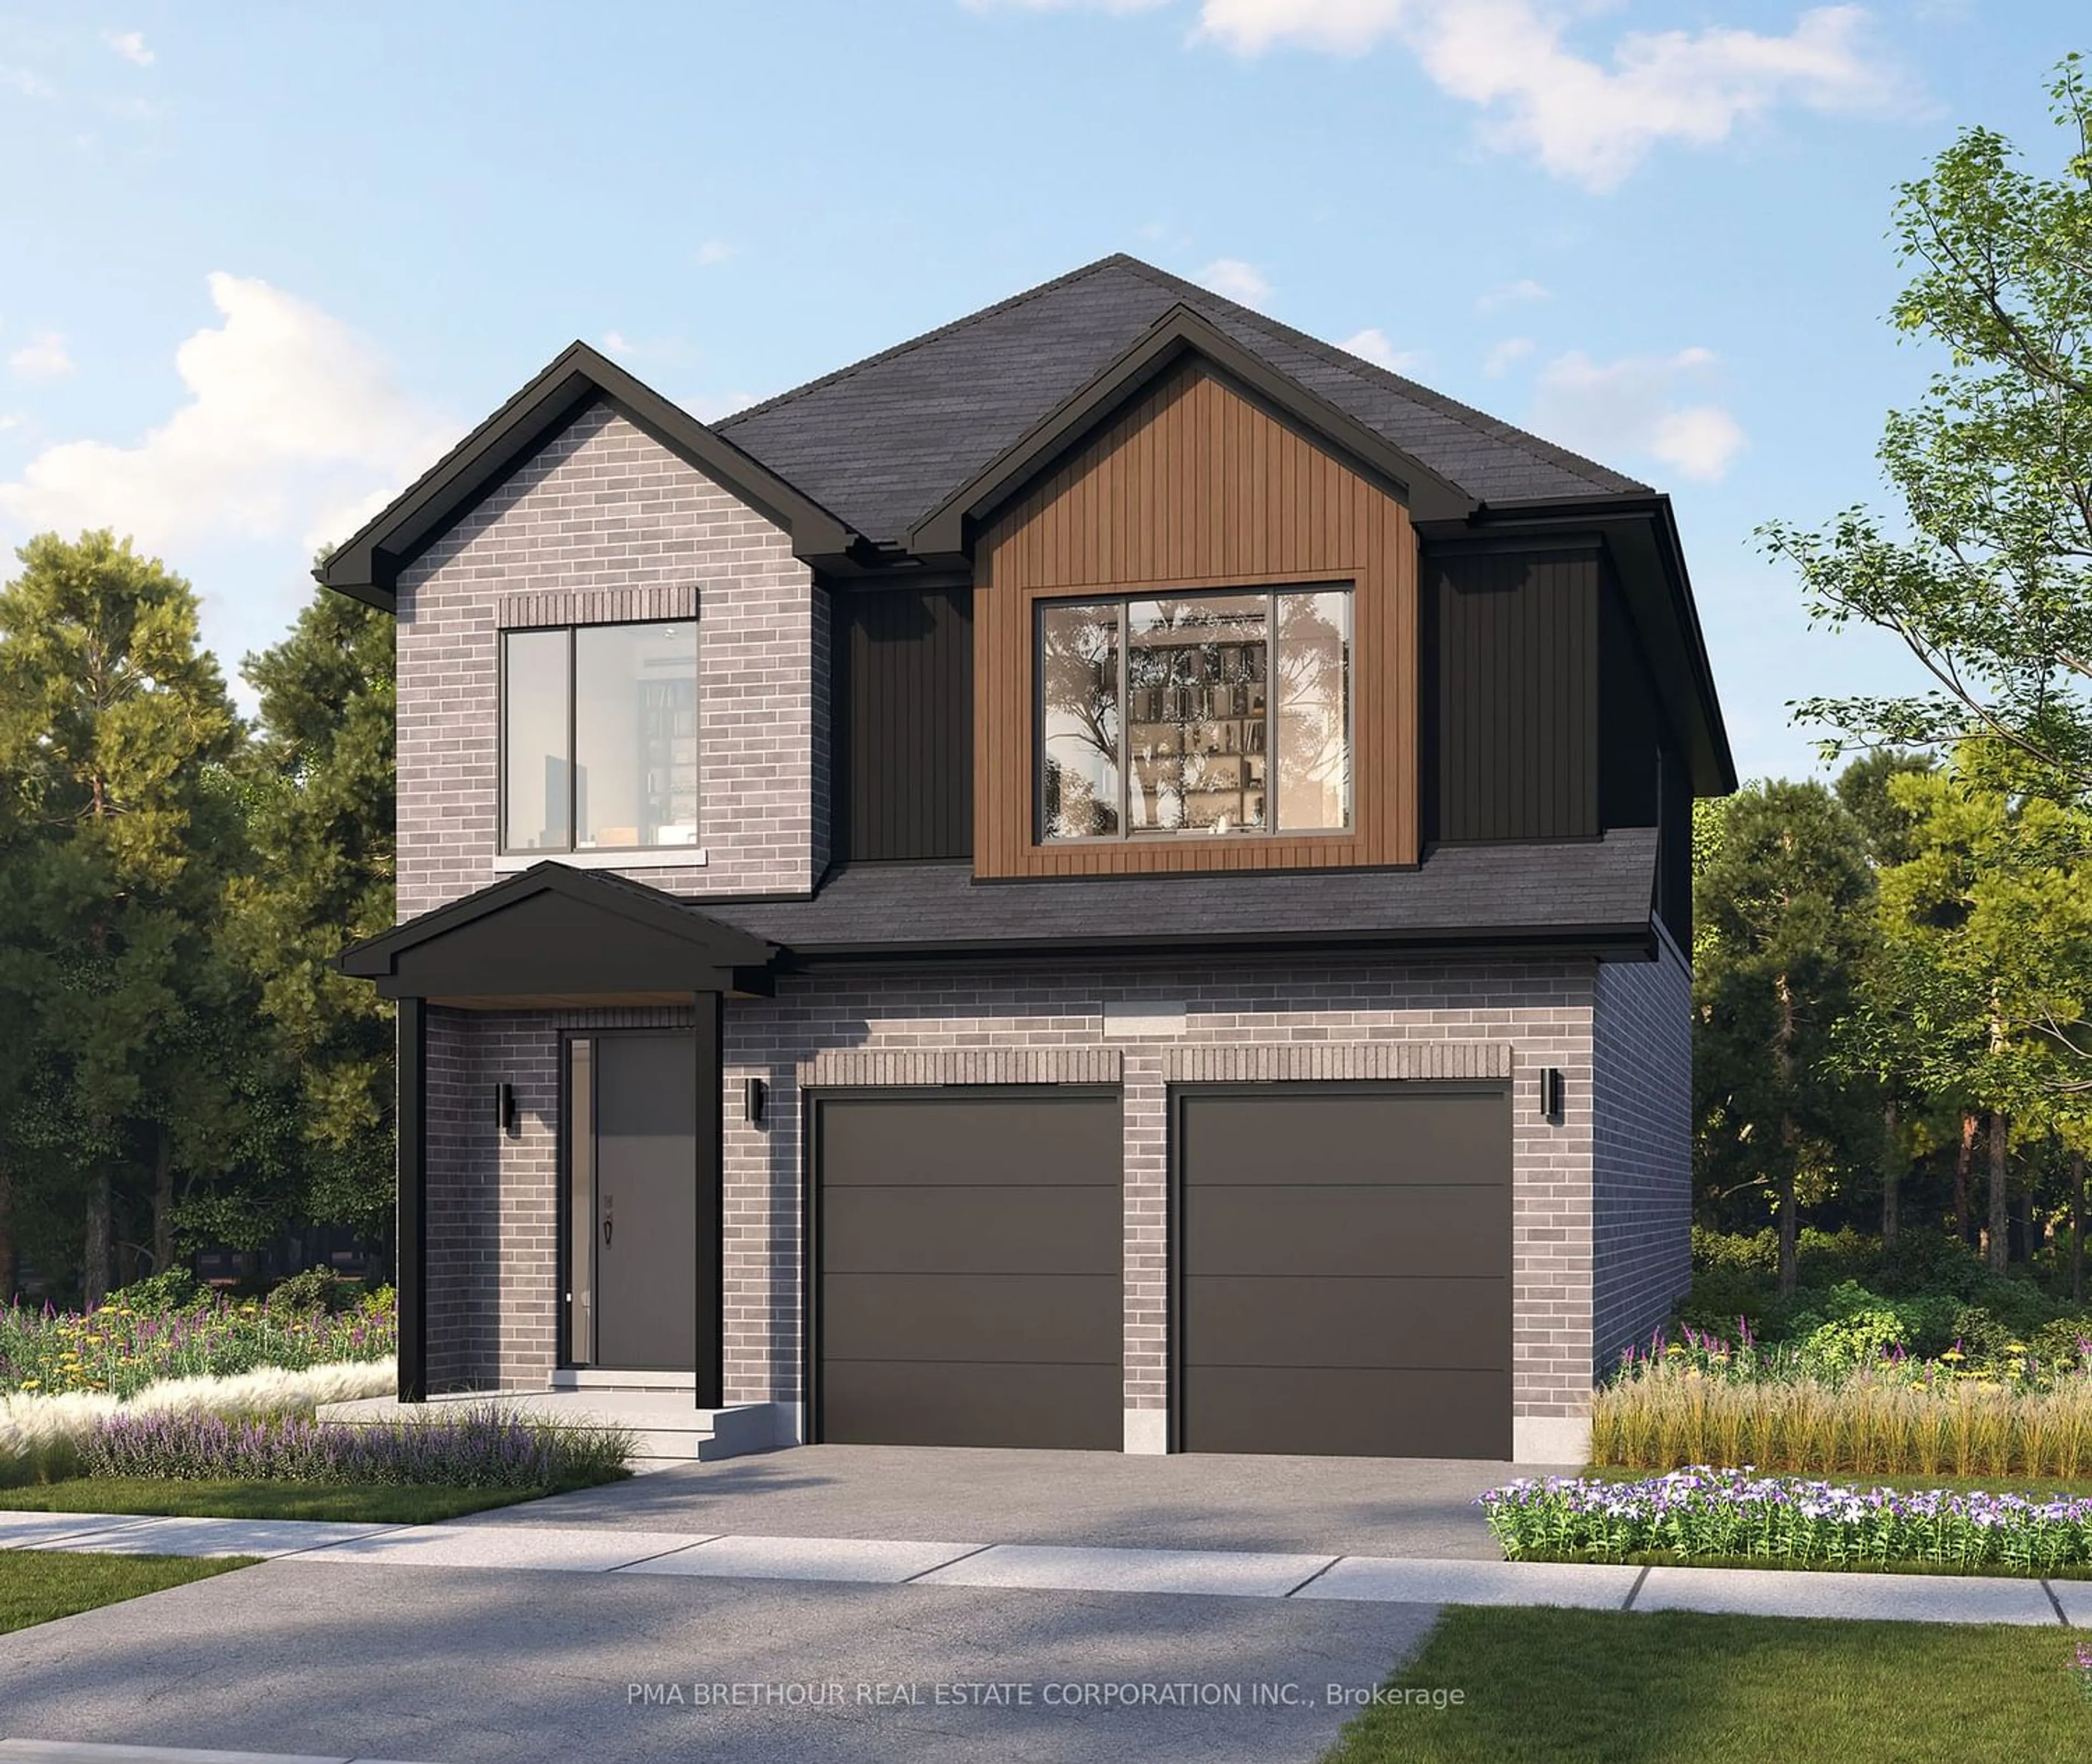 Home with brick exterior material for Lot 10 Robert Attersley Dr, Whitby Ontario L1R 0B6